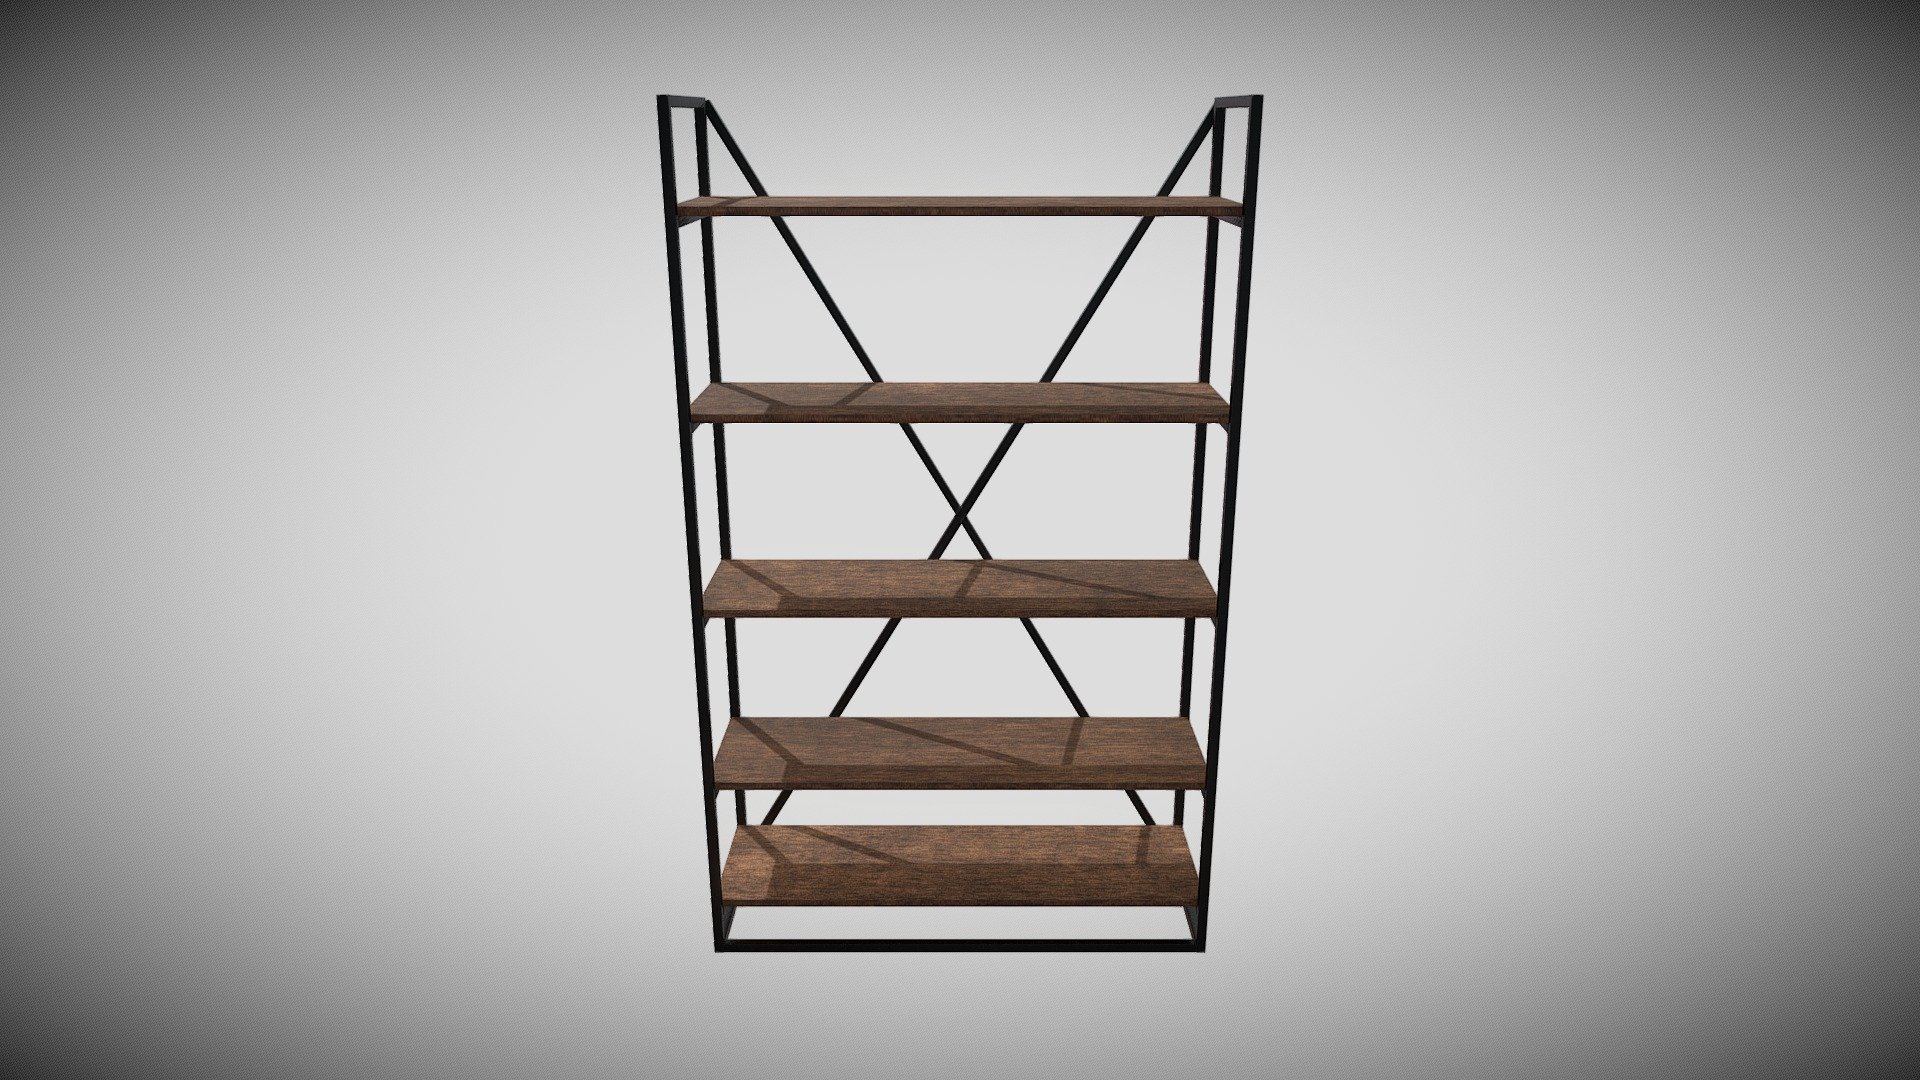 Basic Bookshelf model that i made to improve my workflow knowledge. 

I used 3Ds Max for modeling and Substance Painter for texturing.

I keep same elements to keep this same design group with other models i've shared. You can use in same scene all these models! - Bookshelf (Free) - Download Free 3D model by frkngnl 3d model